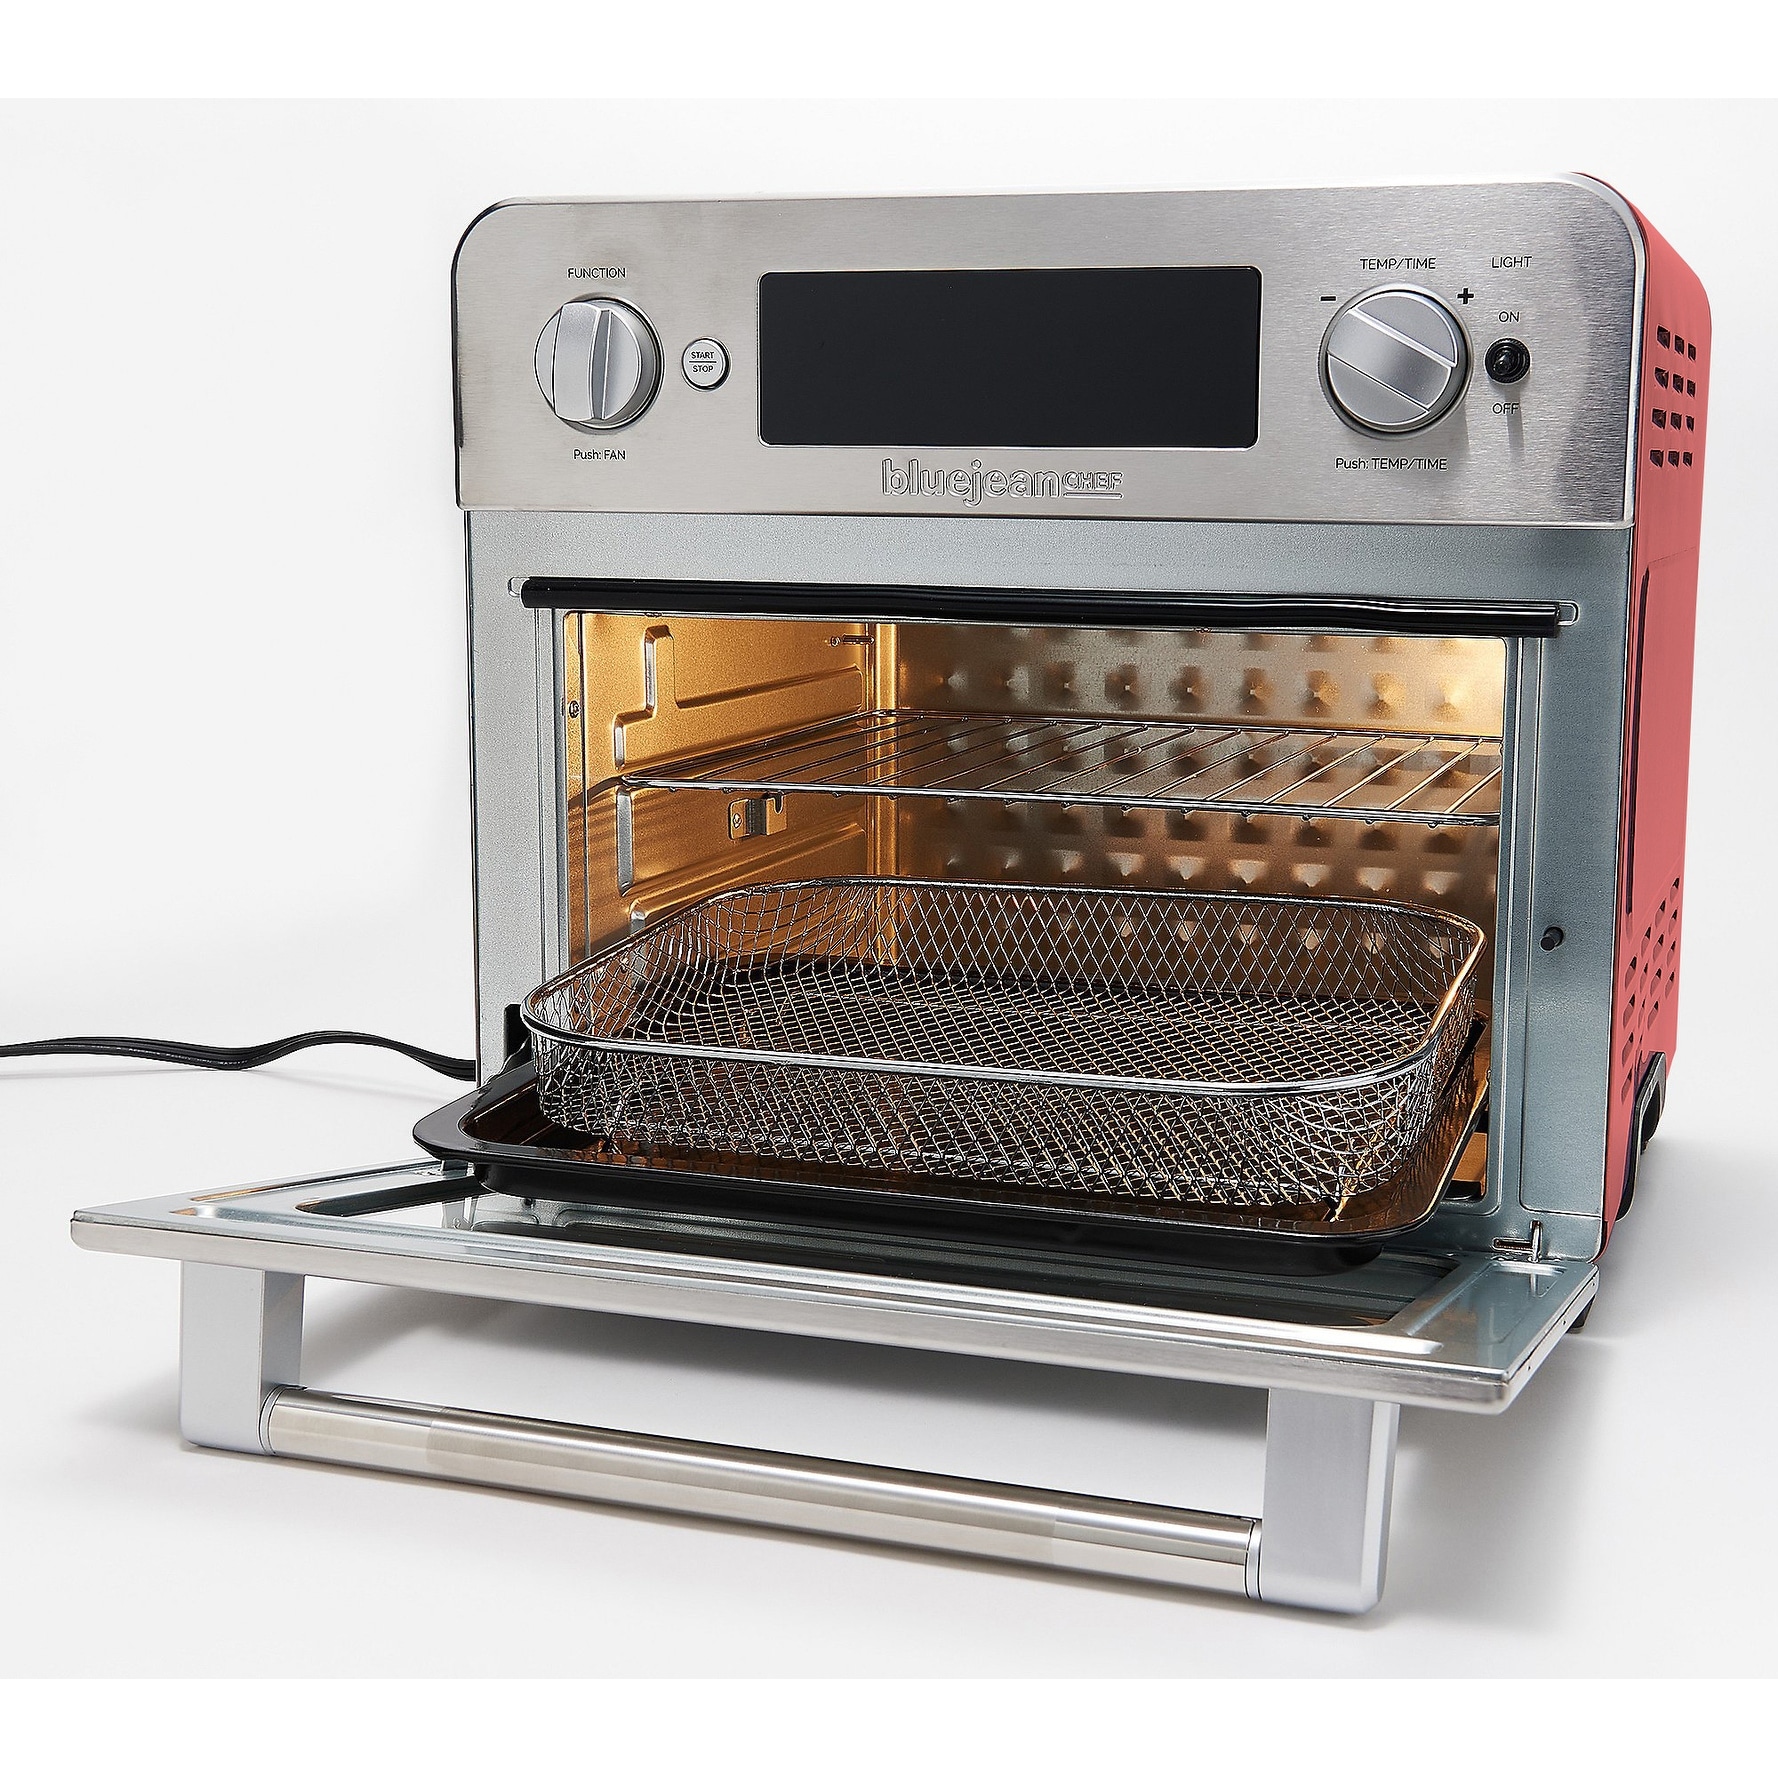 Instant Omni Plus 11-in-1 Toaster Oven In-Depth Review